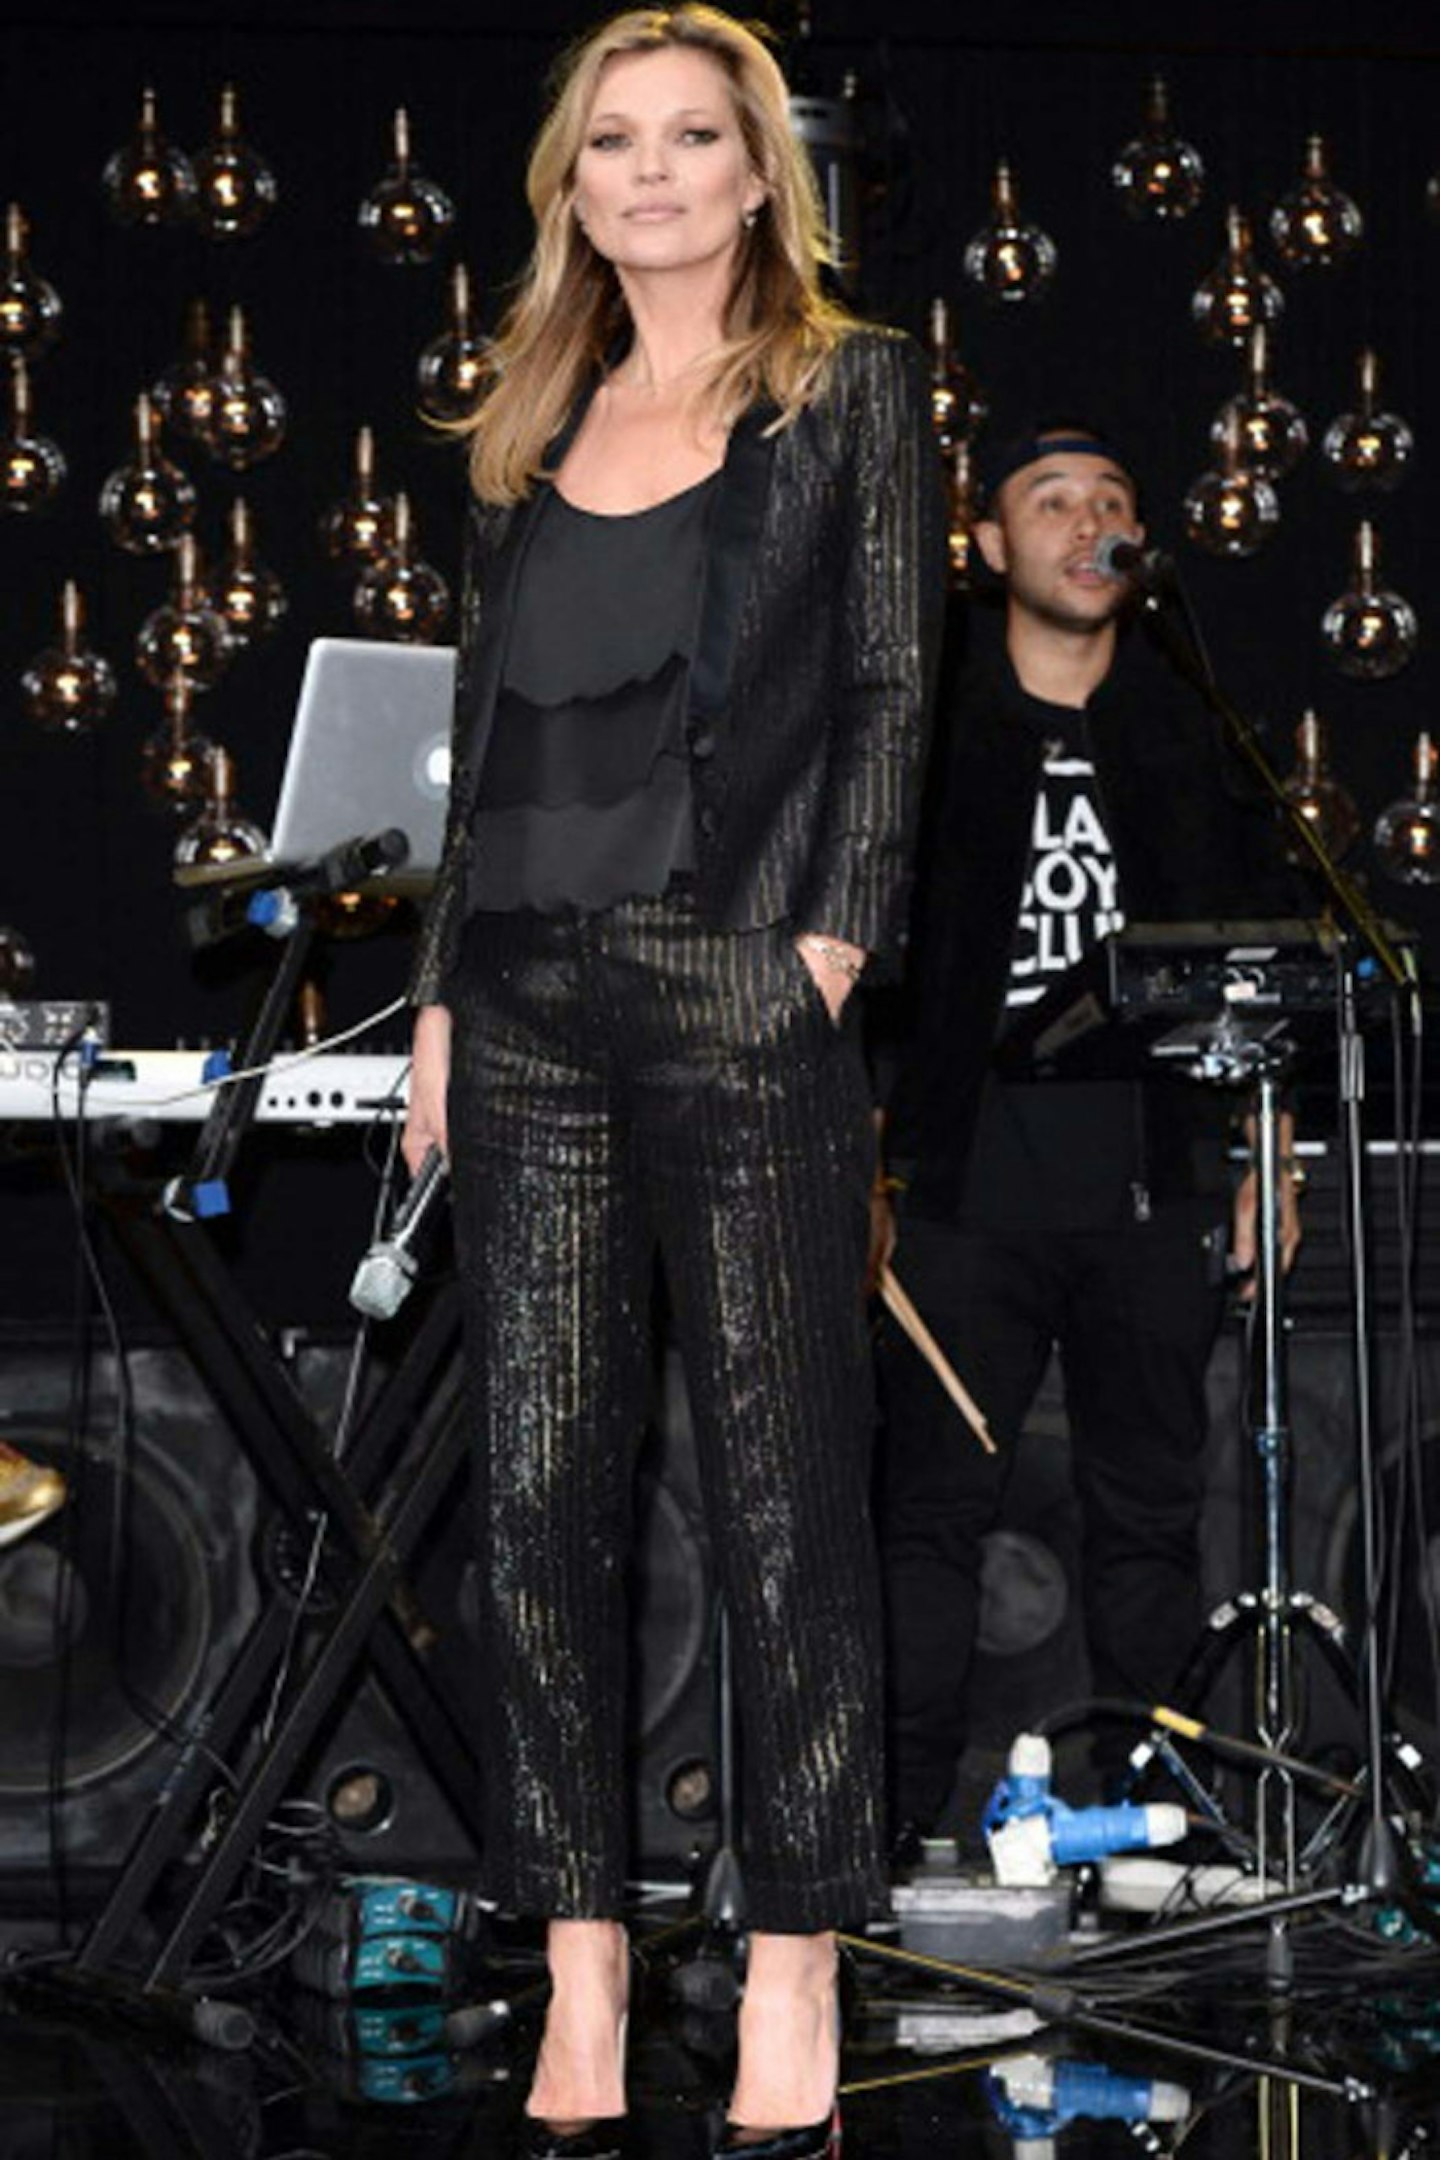 Kate Moss at the launch the Kate Moss For TopShop collection in London, 29 April 2014